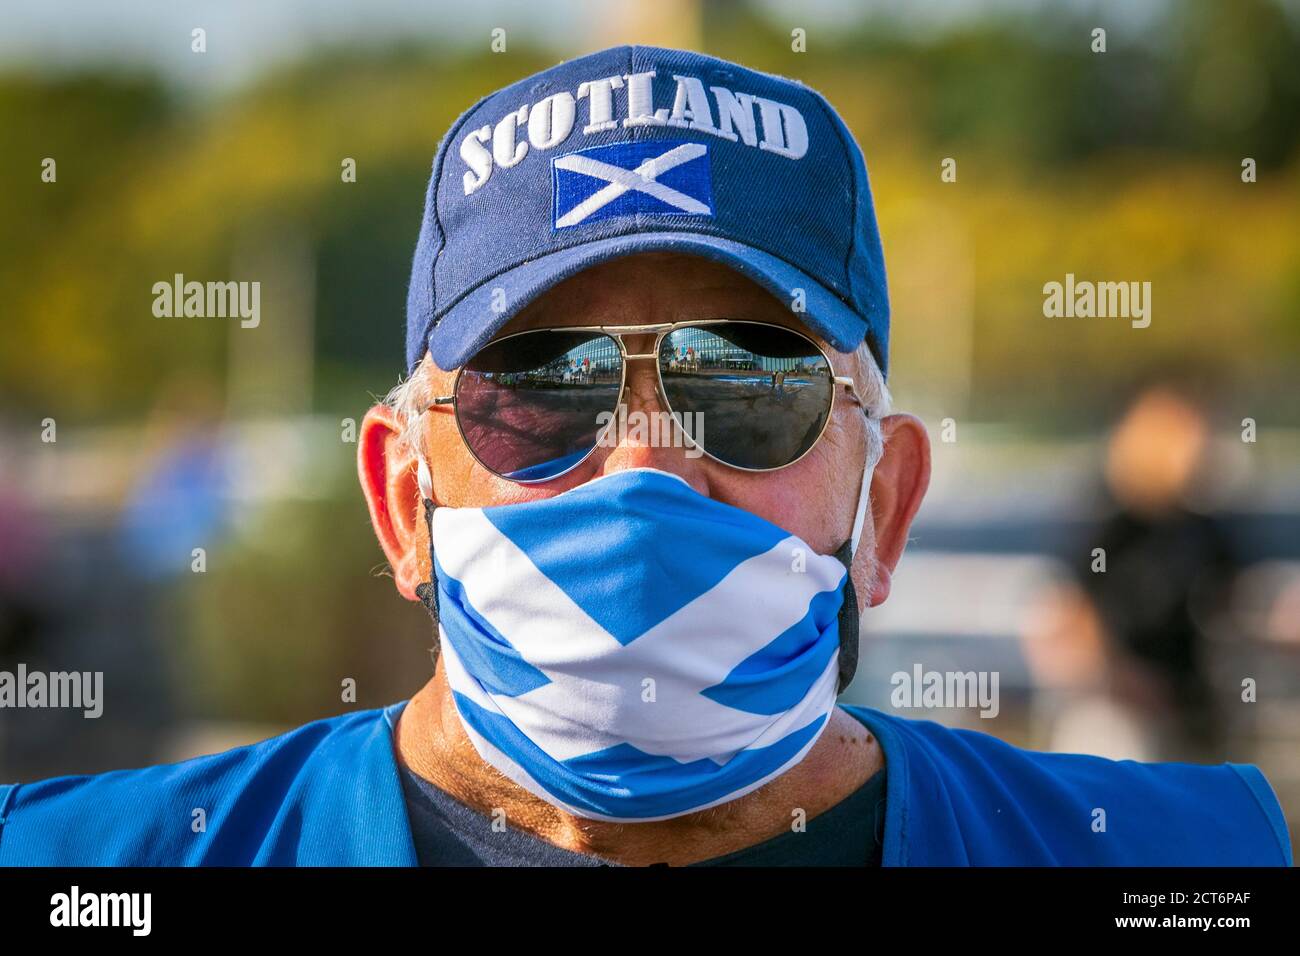 Scottish Independence supporter wearing a saltire face mask a baseball cap logo'ed Scotland and sunglasses, Taken at an independence political rally, Stock Photo